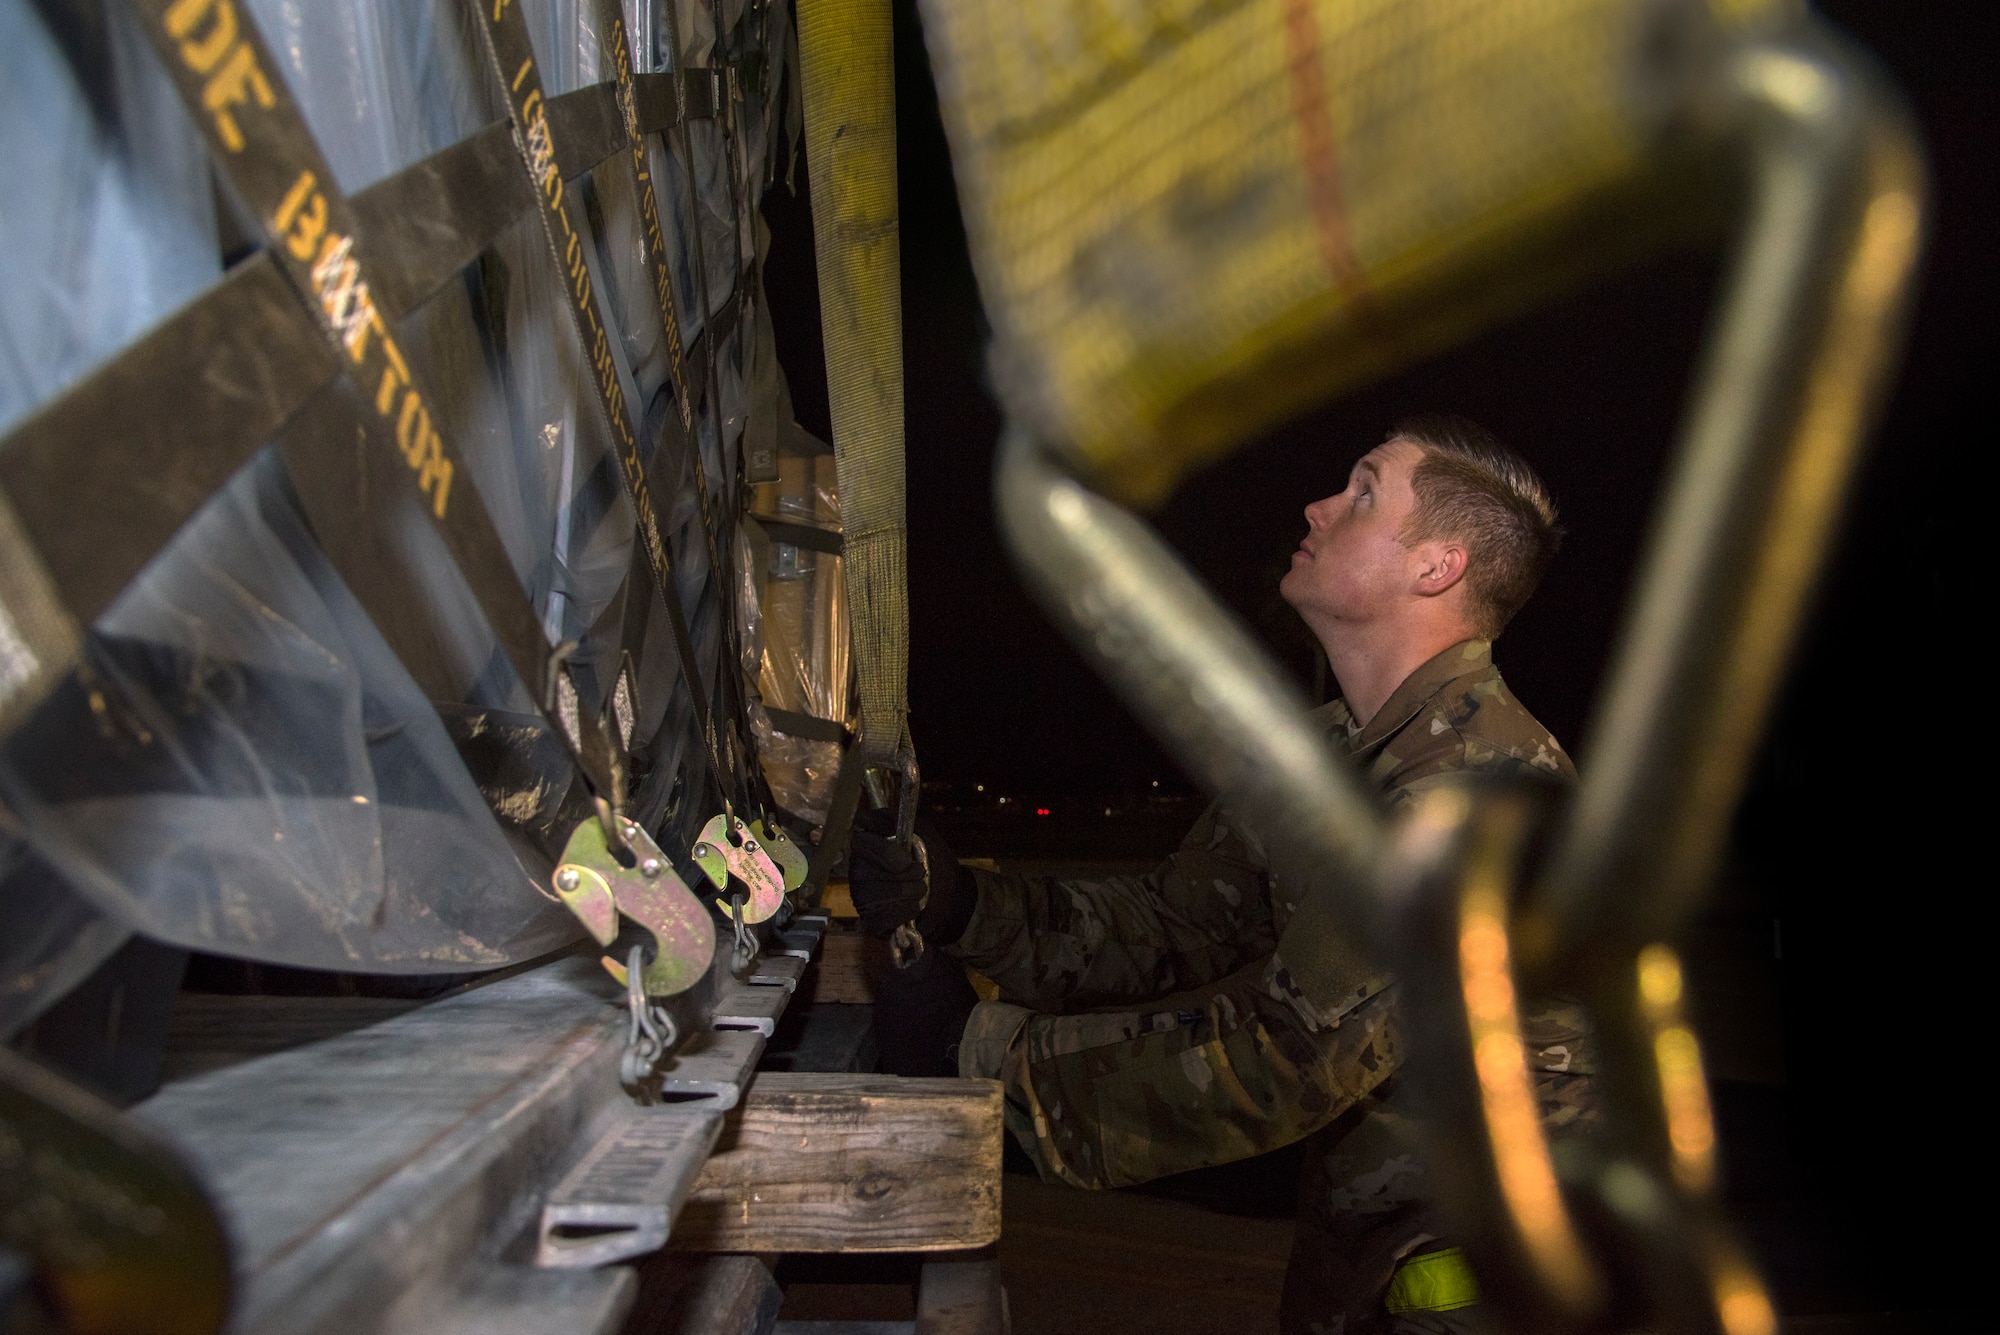 A U.S. Air Force 6th Logistics Readiness Squadron (LRS) Airman secures cargo during an operational readiness exercise at MacDill Air Force Base, Fla., Feb. 9, 2019. The 6th LRS worked alongside 927th Air Refueling Wing Airmen during the three-day exercise that staged a cargo deployment function responsible for receiving, checking-in, inspecting, marshaling, load planning, manifesting shipments and supervising cargo loading.